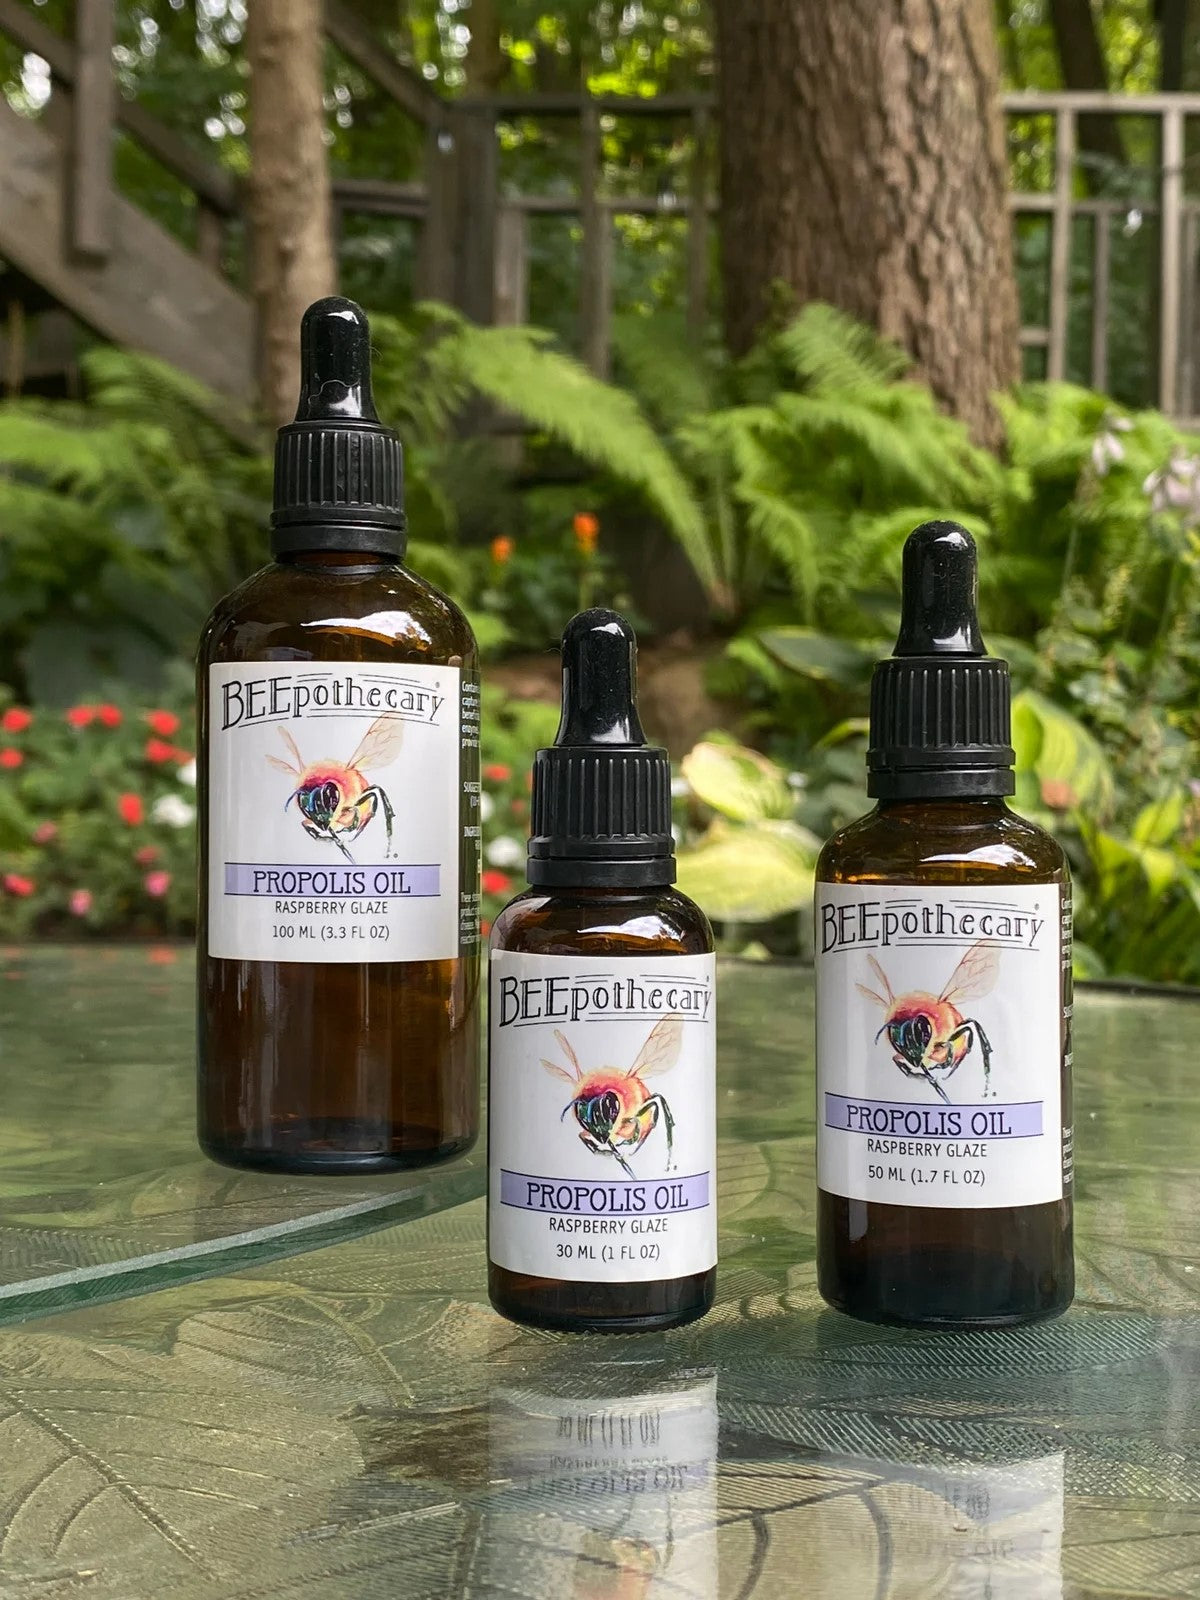 BEEpothecary Propolis Oil Raspberry Glaze in 30 ml, 50 ml, 100 ml brown bottles with white label and dropper displayed outdoors.